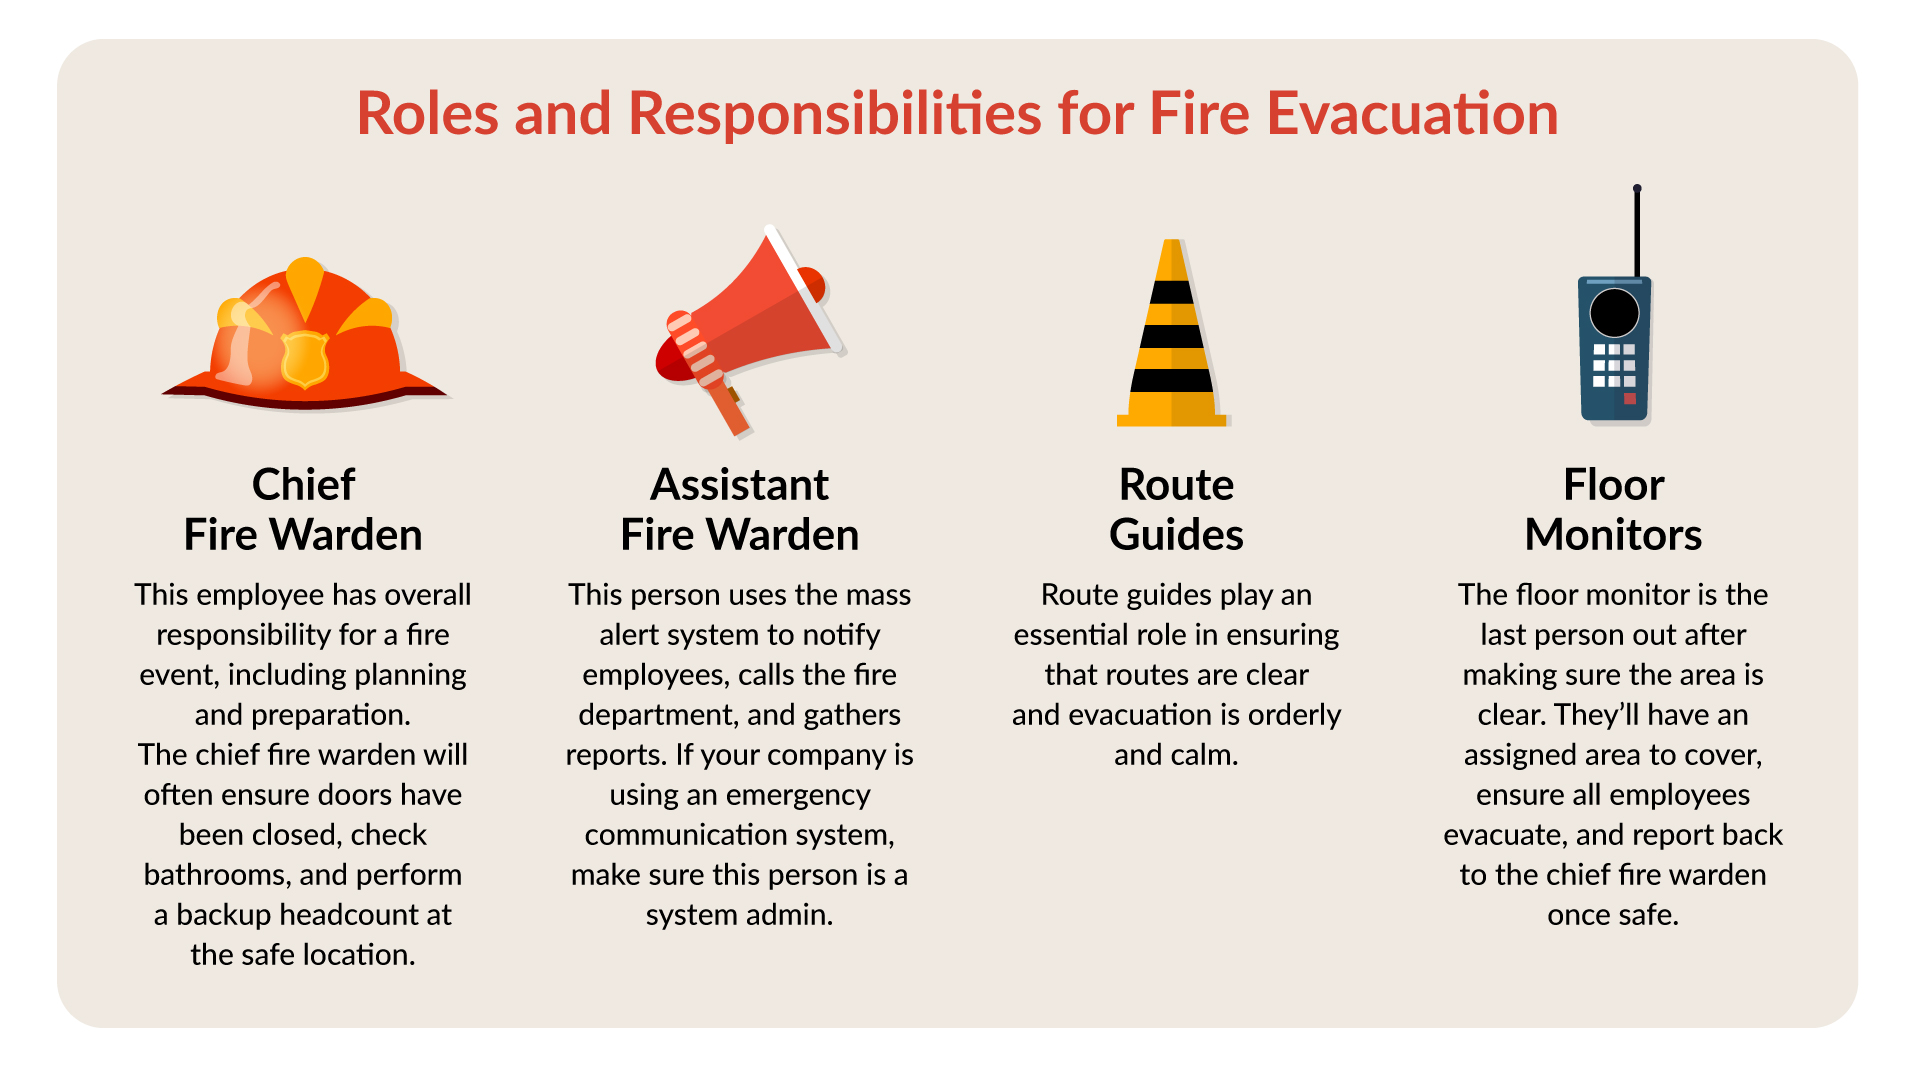 Evacuation Plans & Special Needs for Occupants with Special Needs
